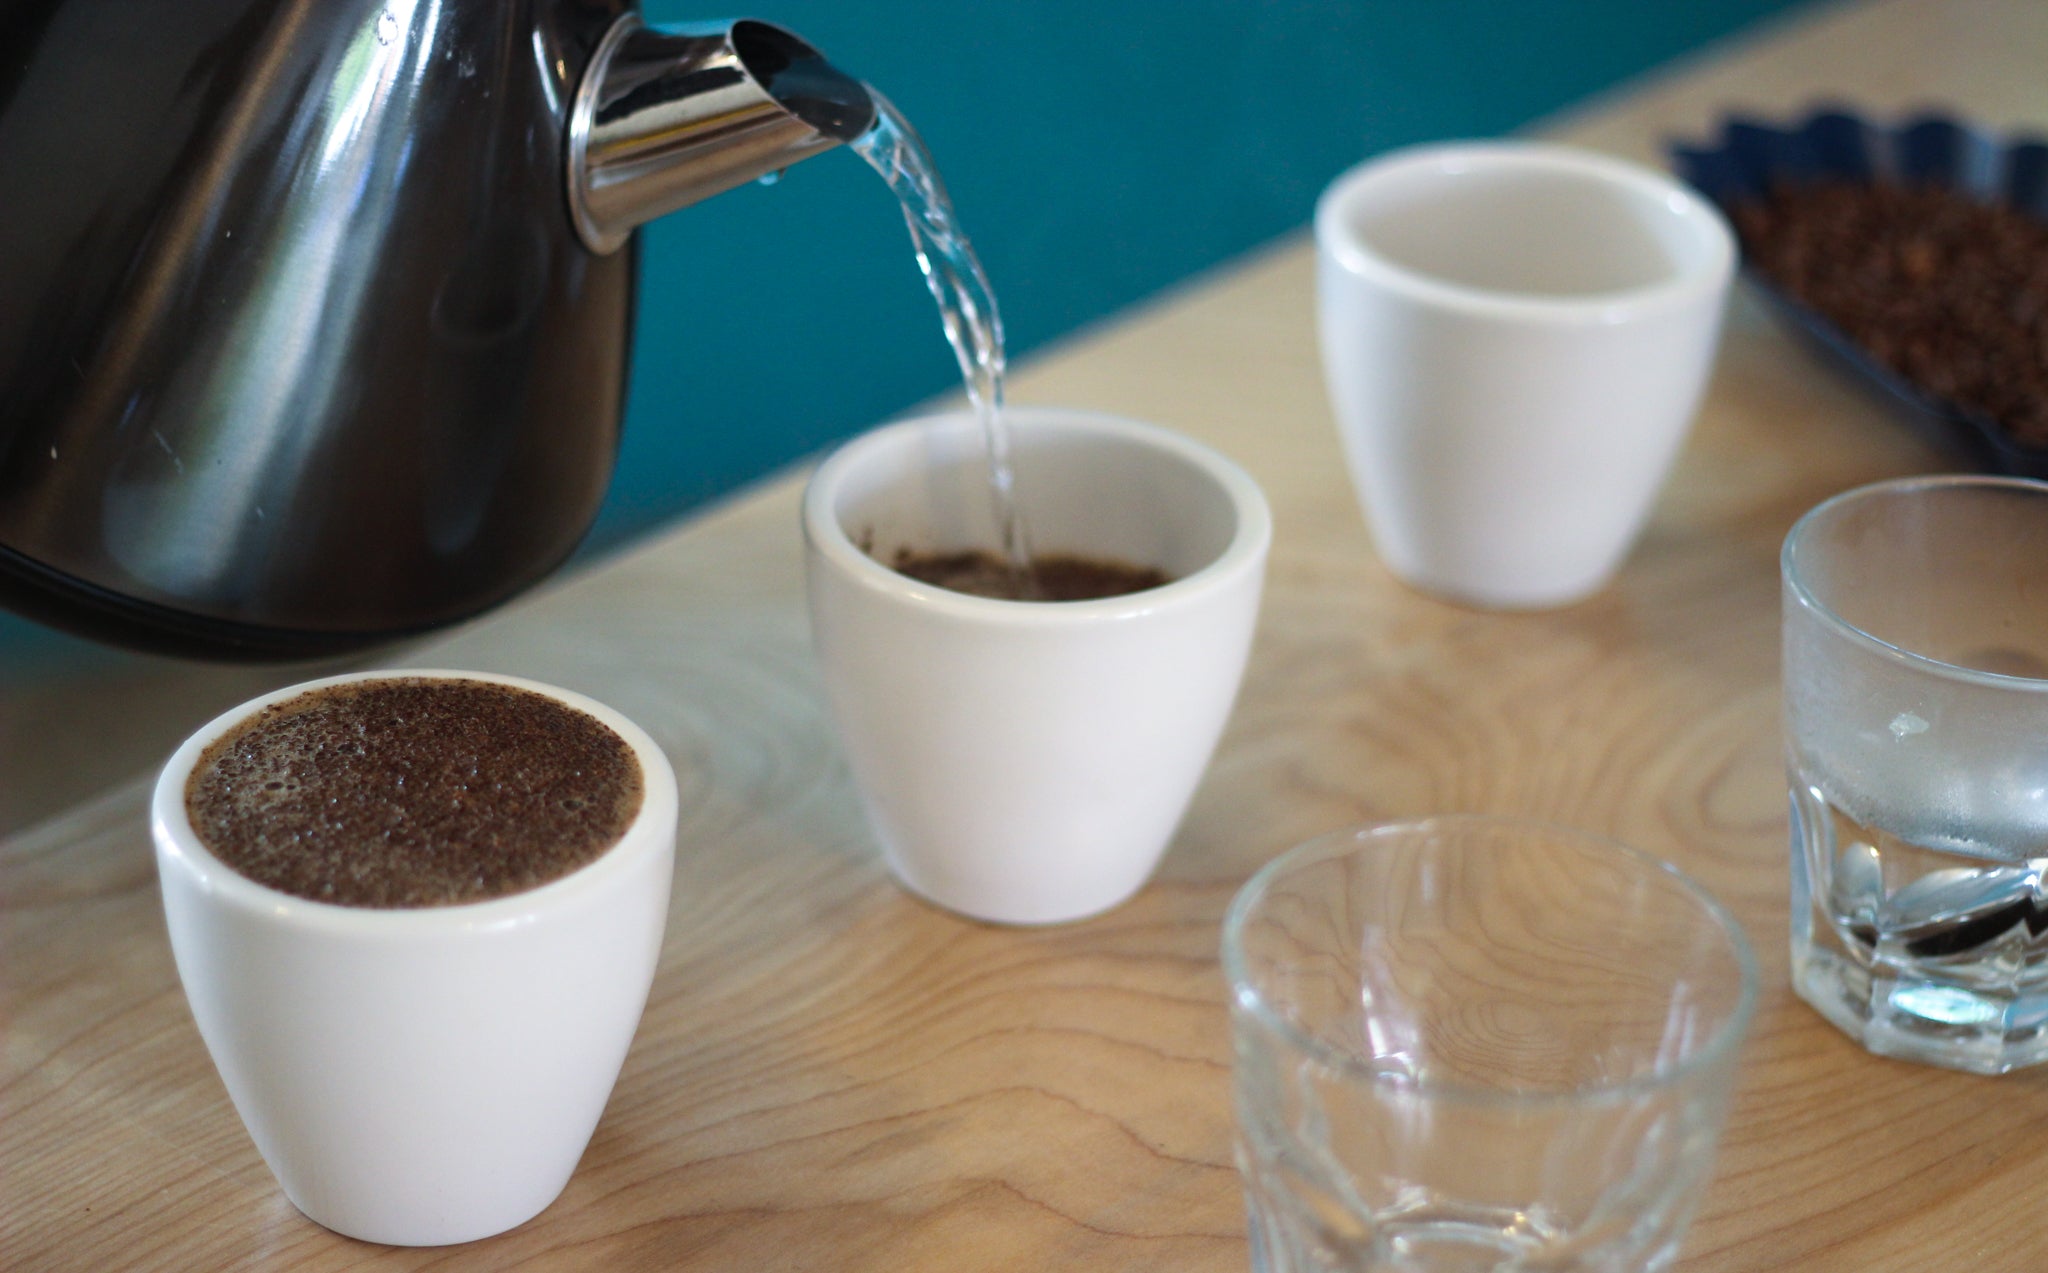 coffee cupping bowl